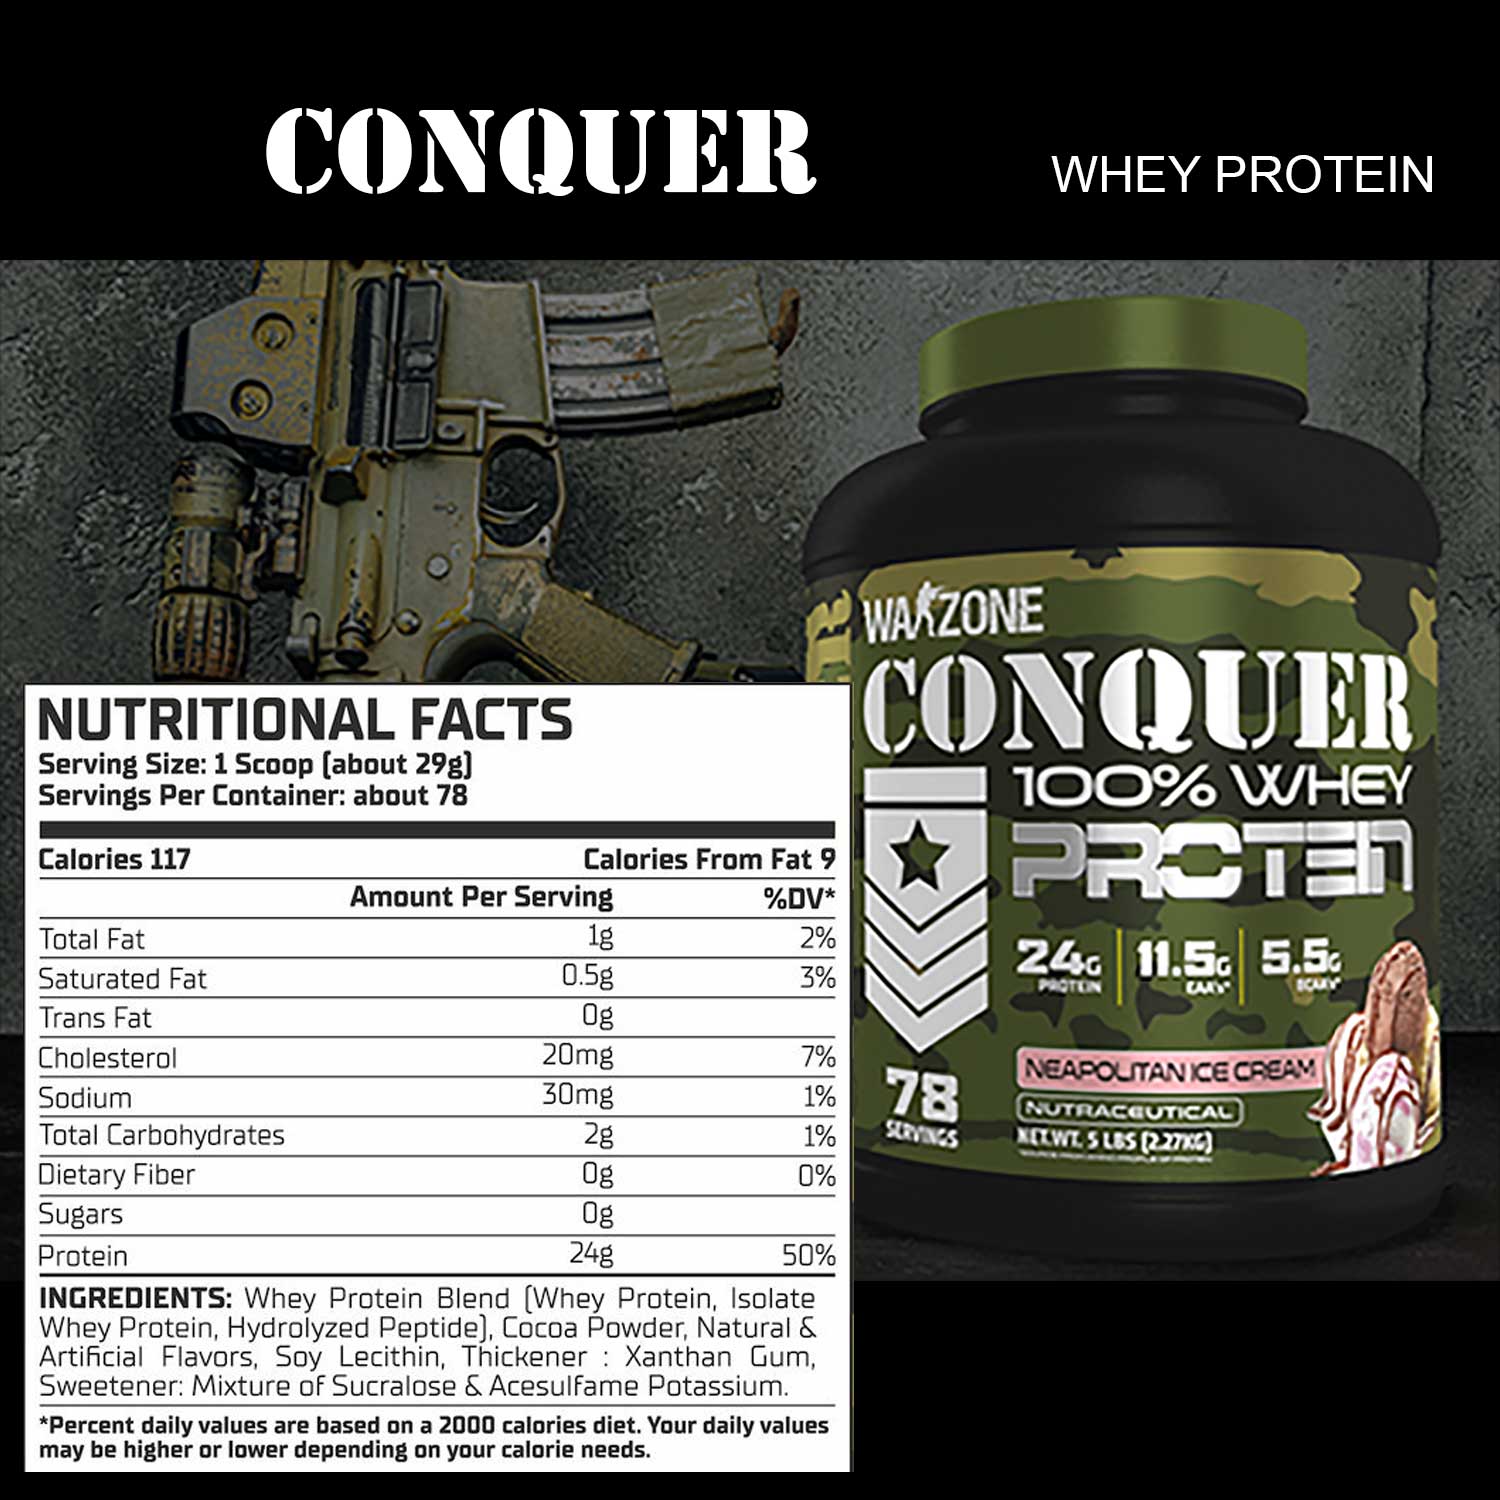 CONQUER whey facts